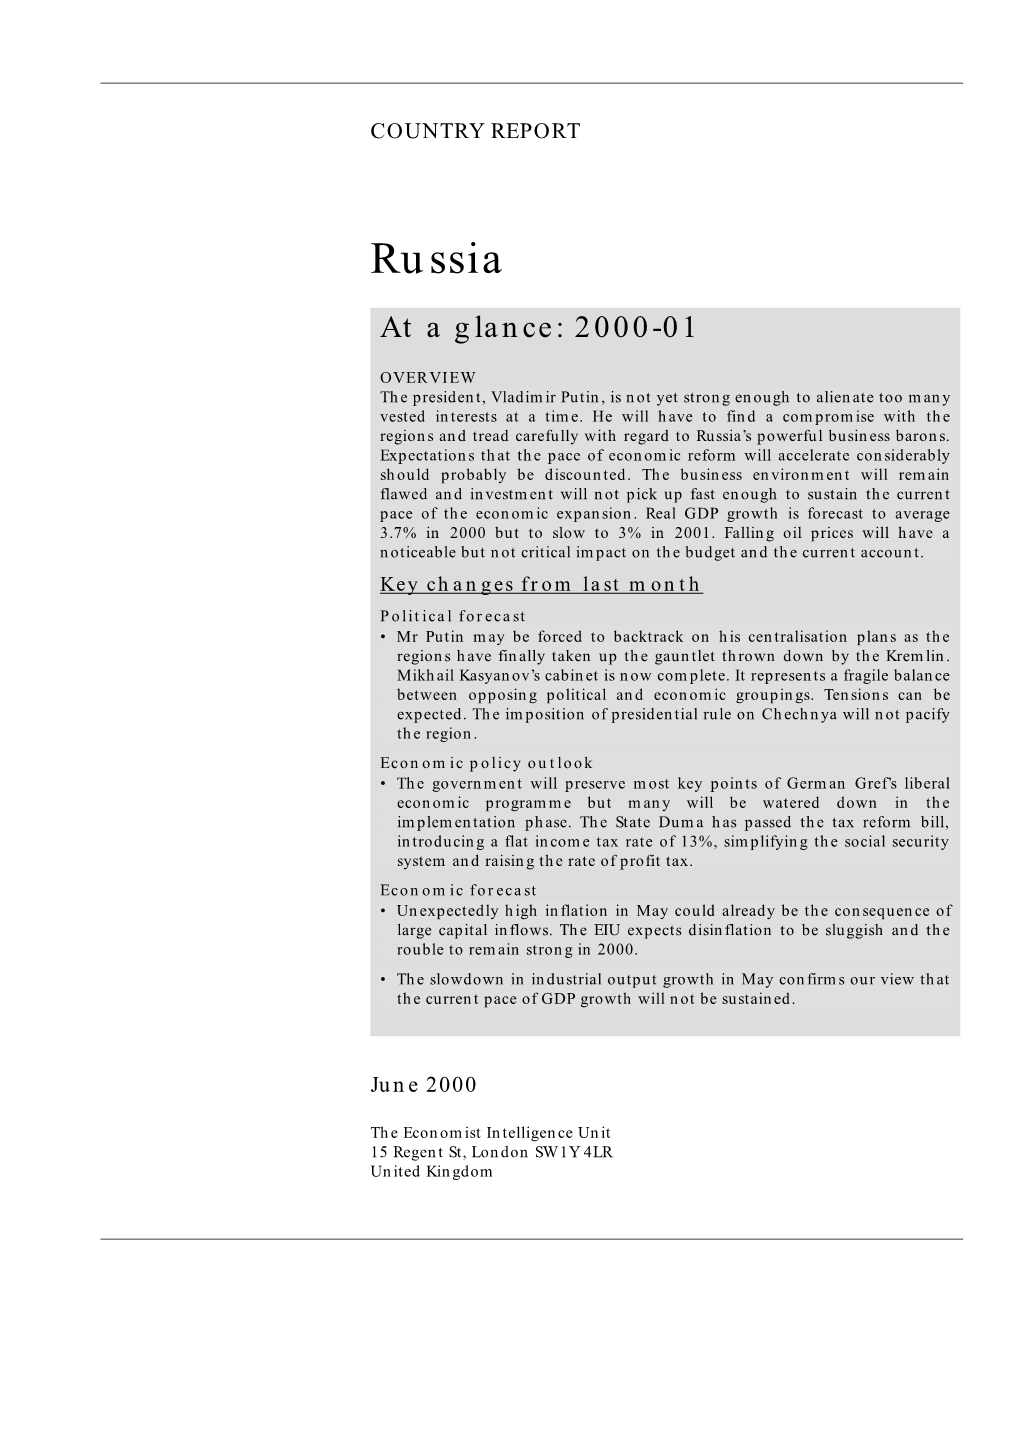 Russia at a Glance: 2000-01